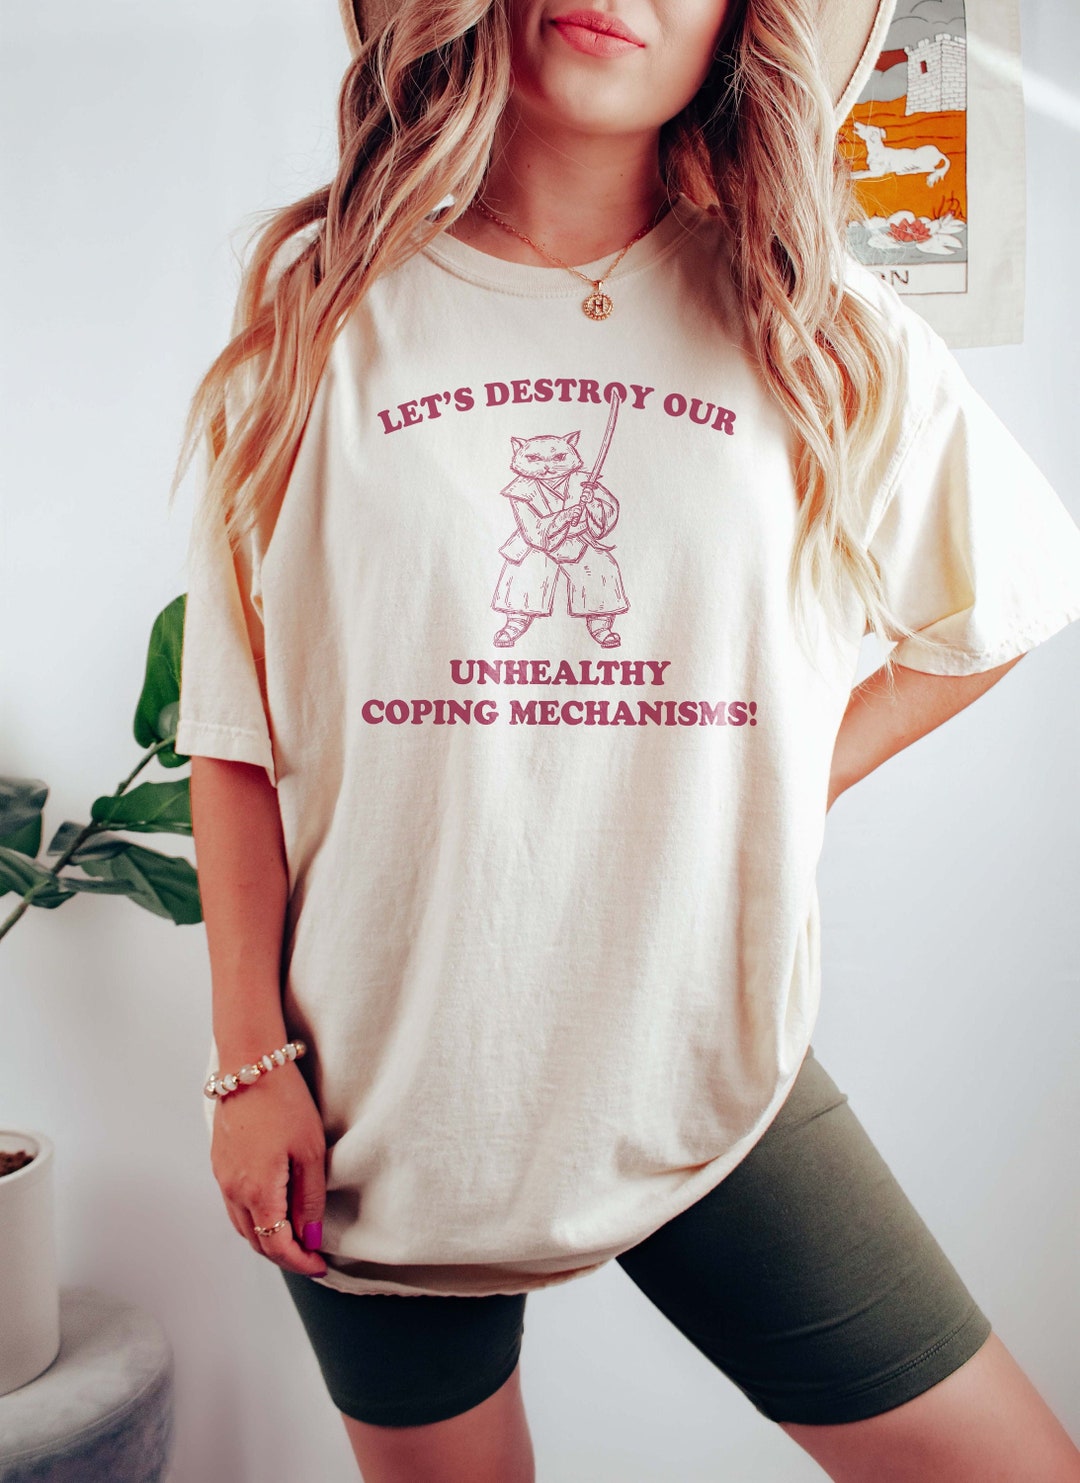 Lets Destroy Our Unhealthy Coping Mechanisms Funny Mental Health Shirt ...